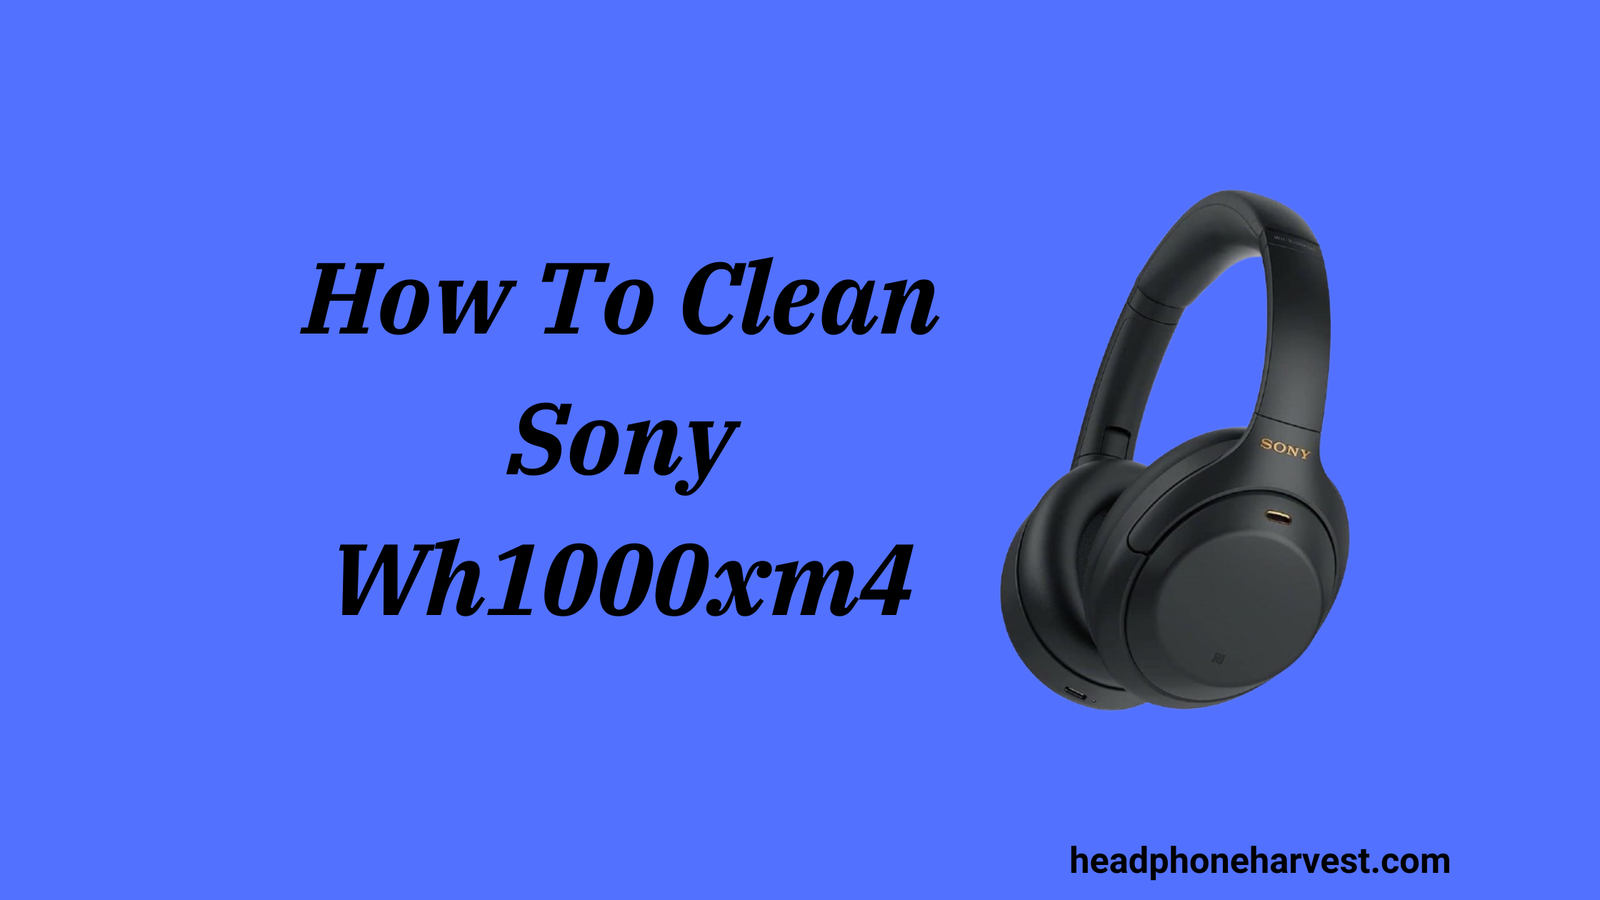 How To Clean Sony Wh1000xm4